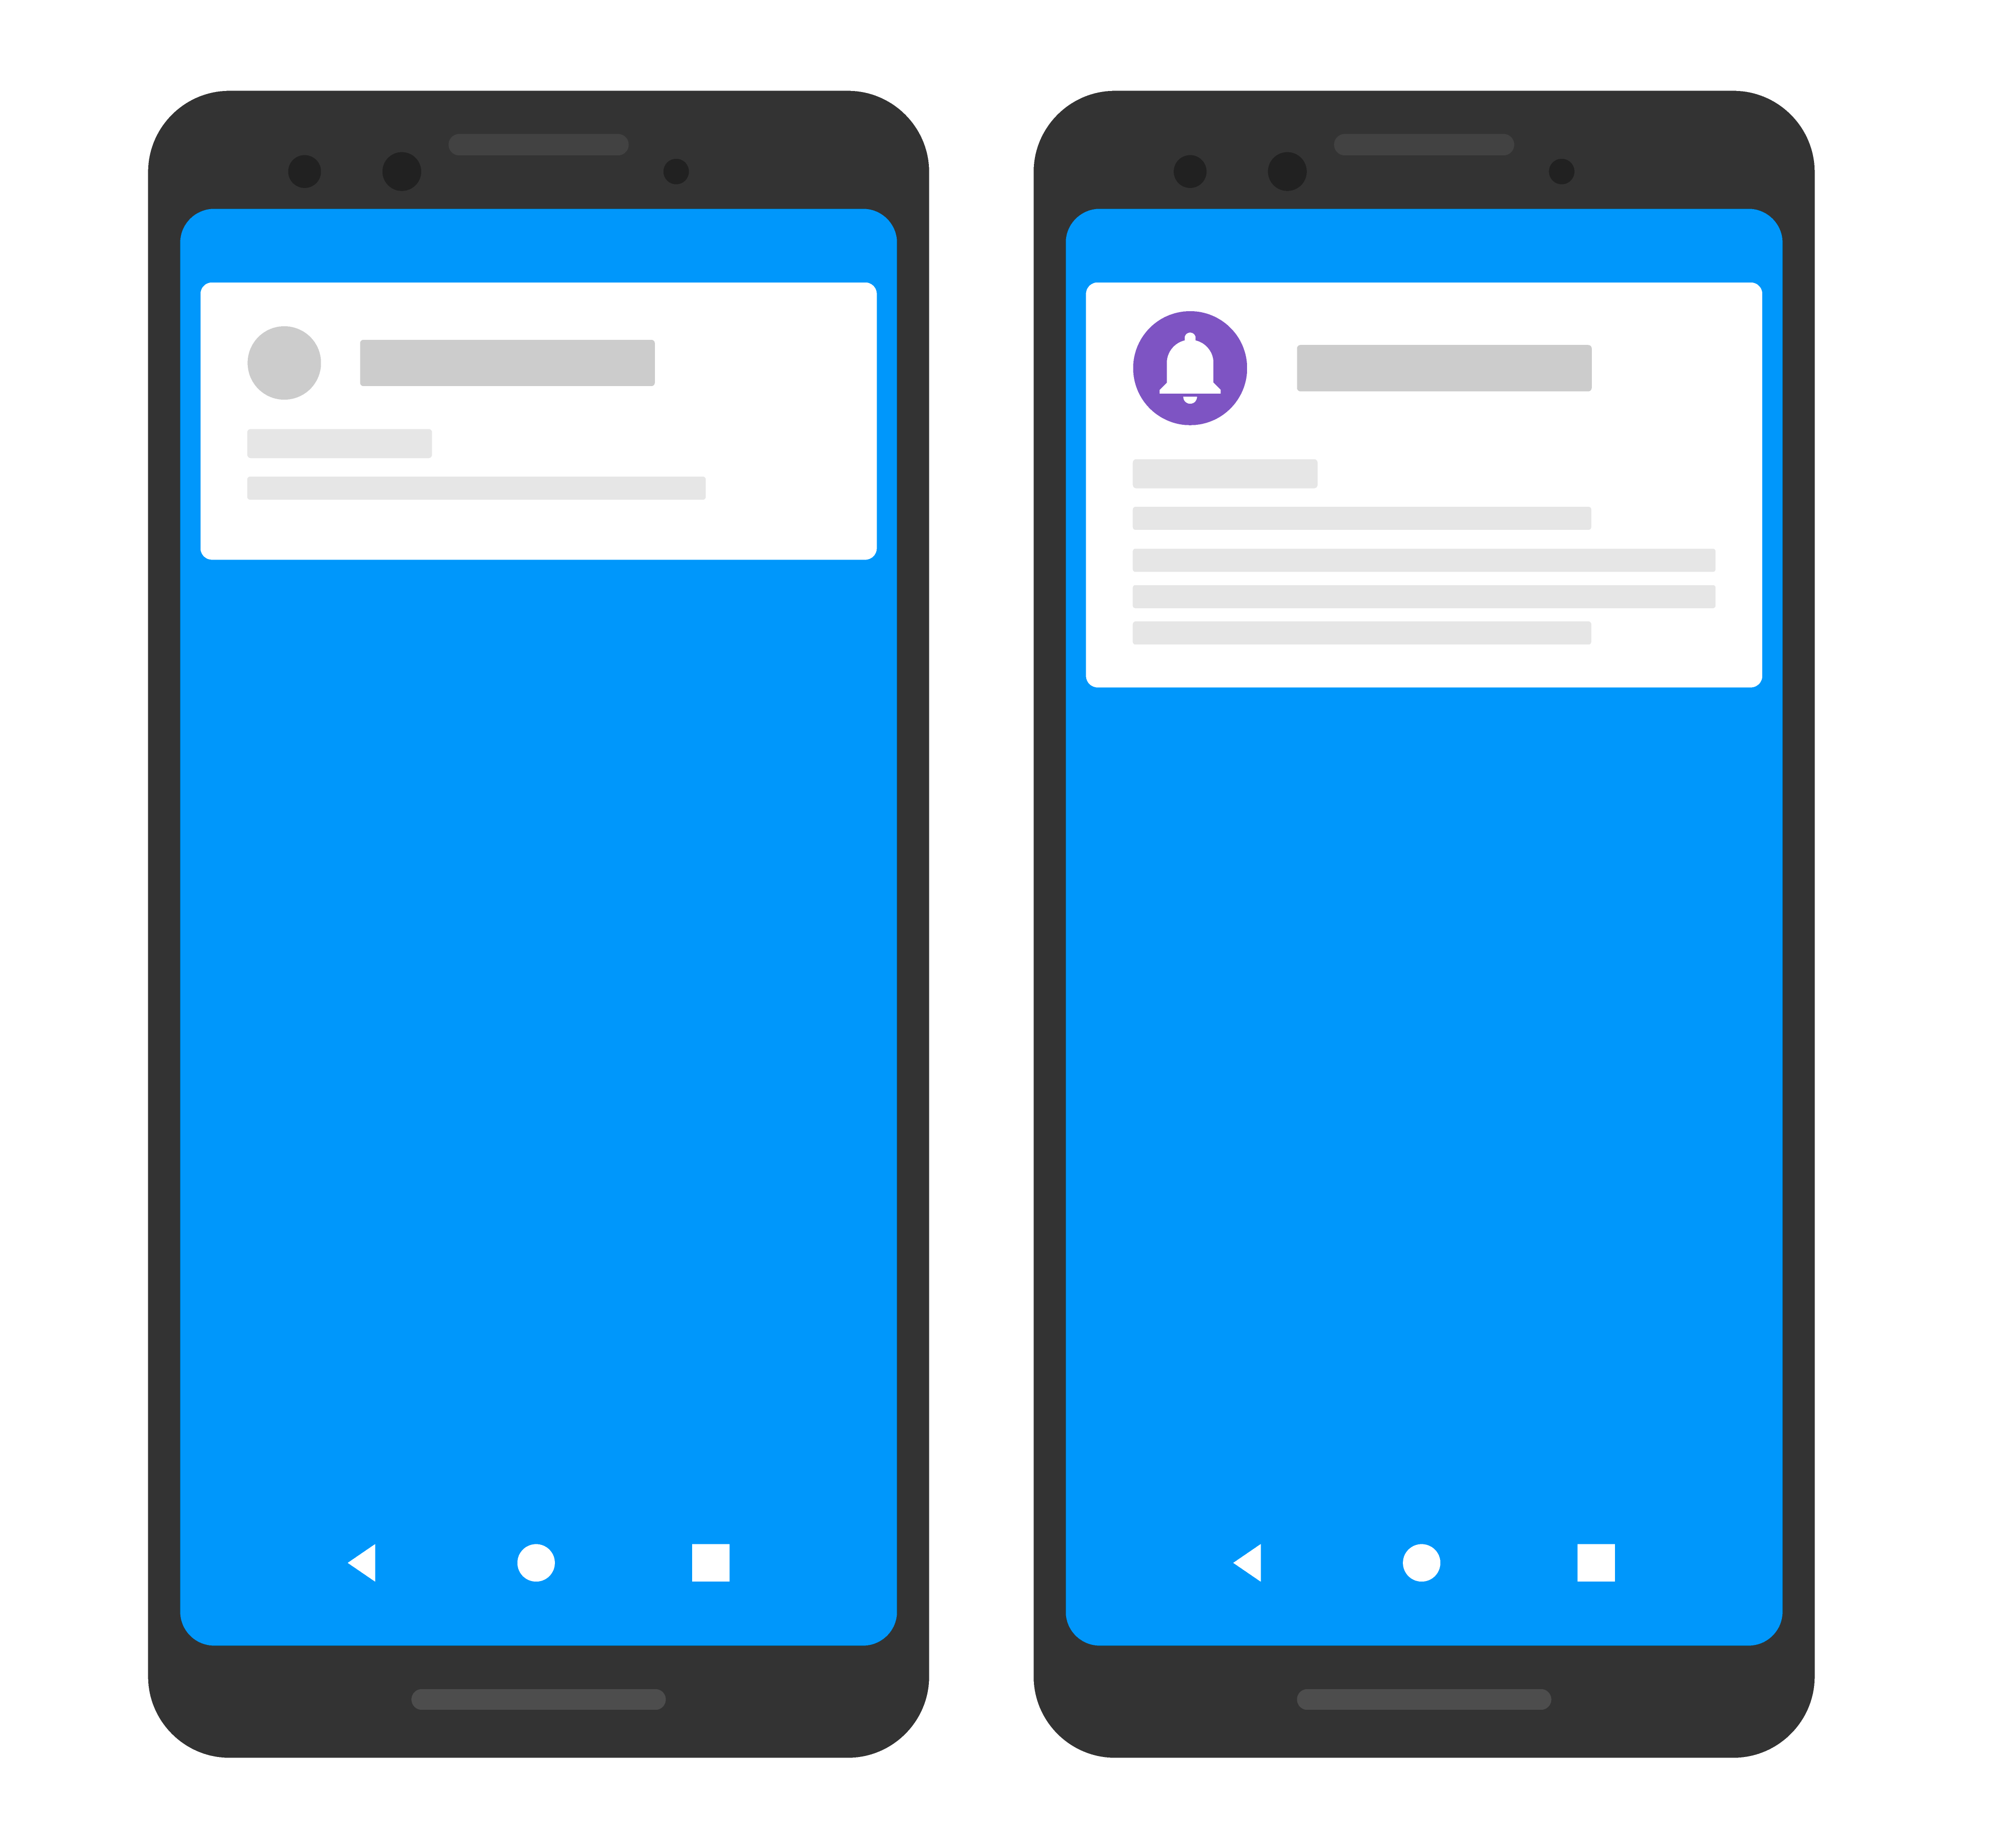 Simple drawing of two devices, with one displaying a custom icon and color